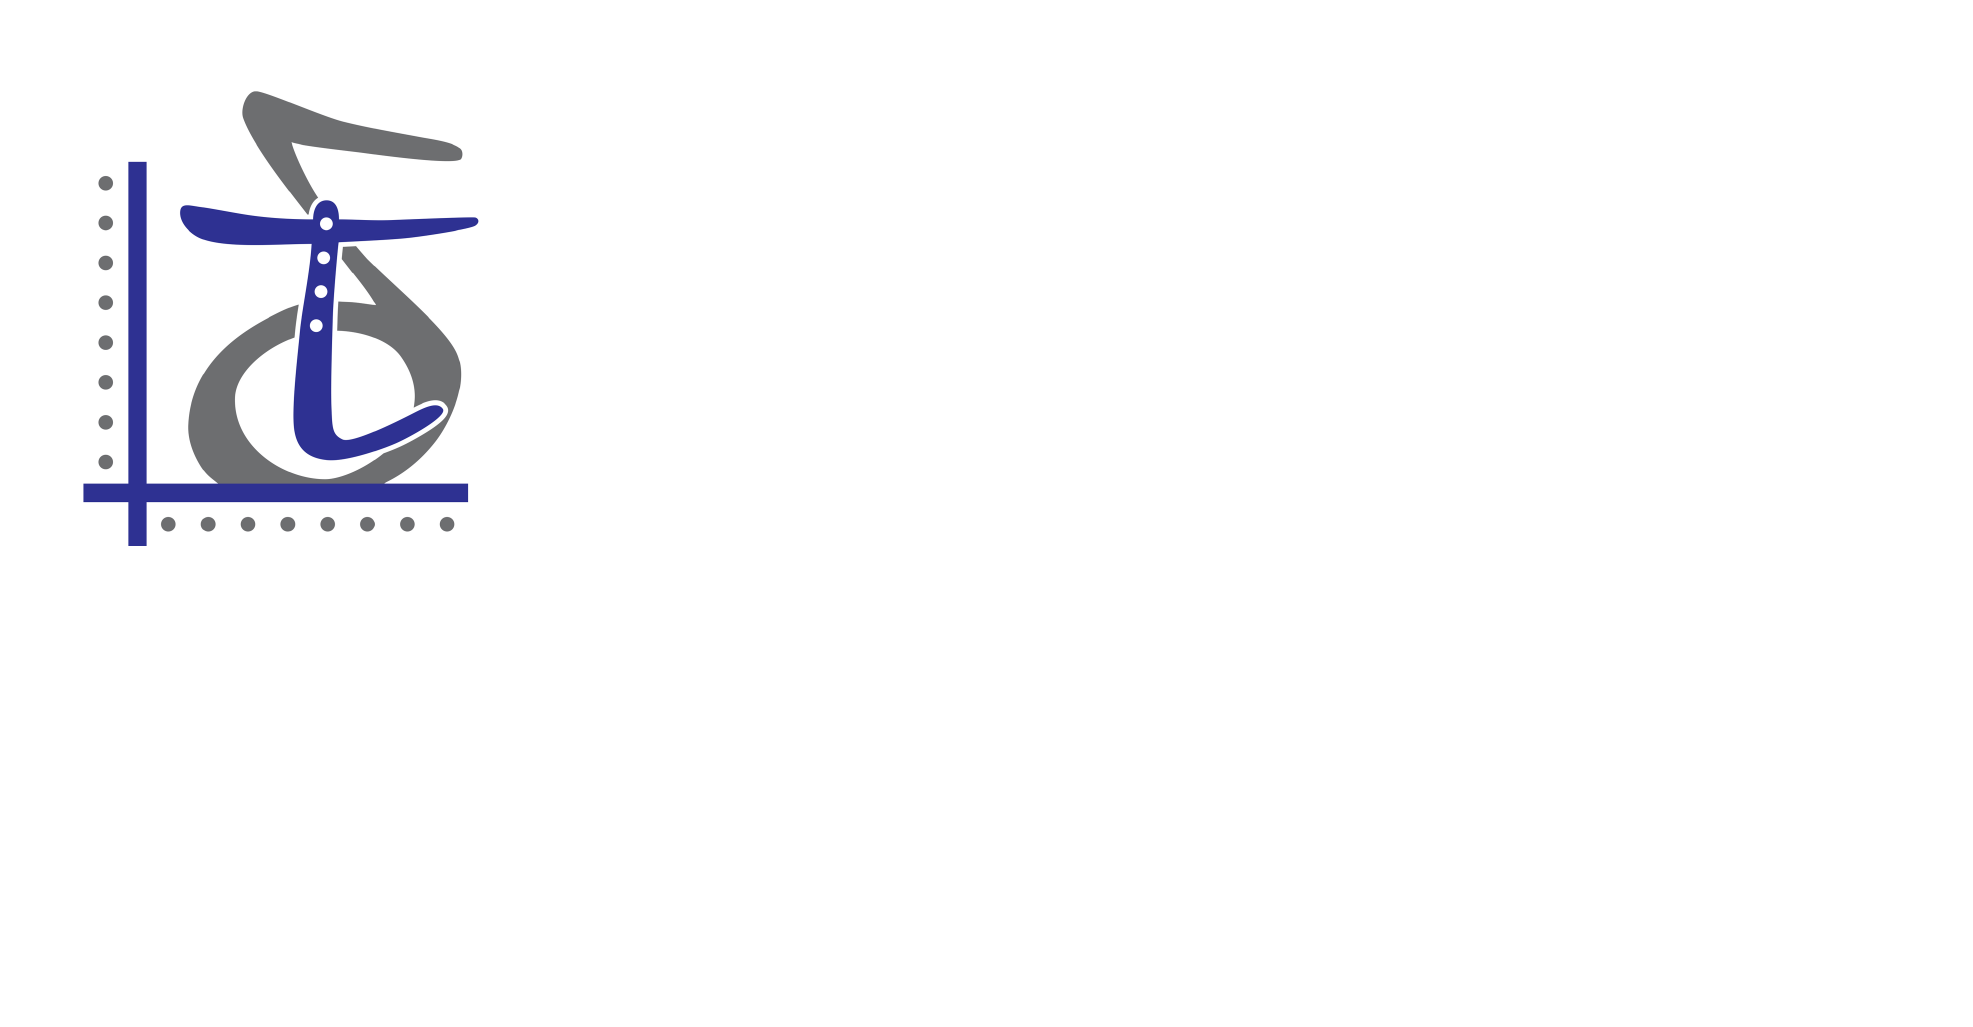 Transition from the logo used between 1994 and 2020 to the new logo.